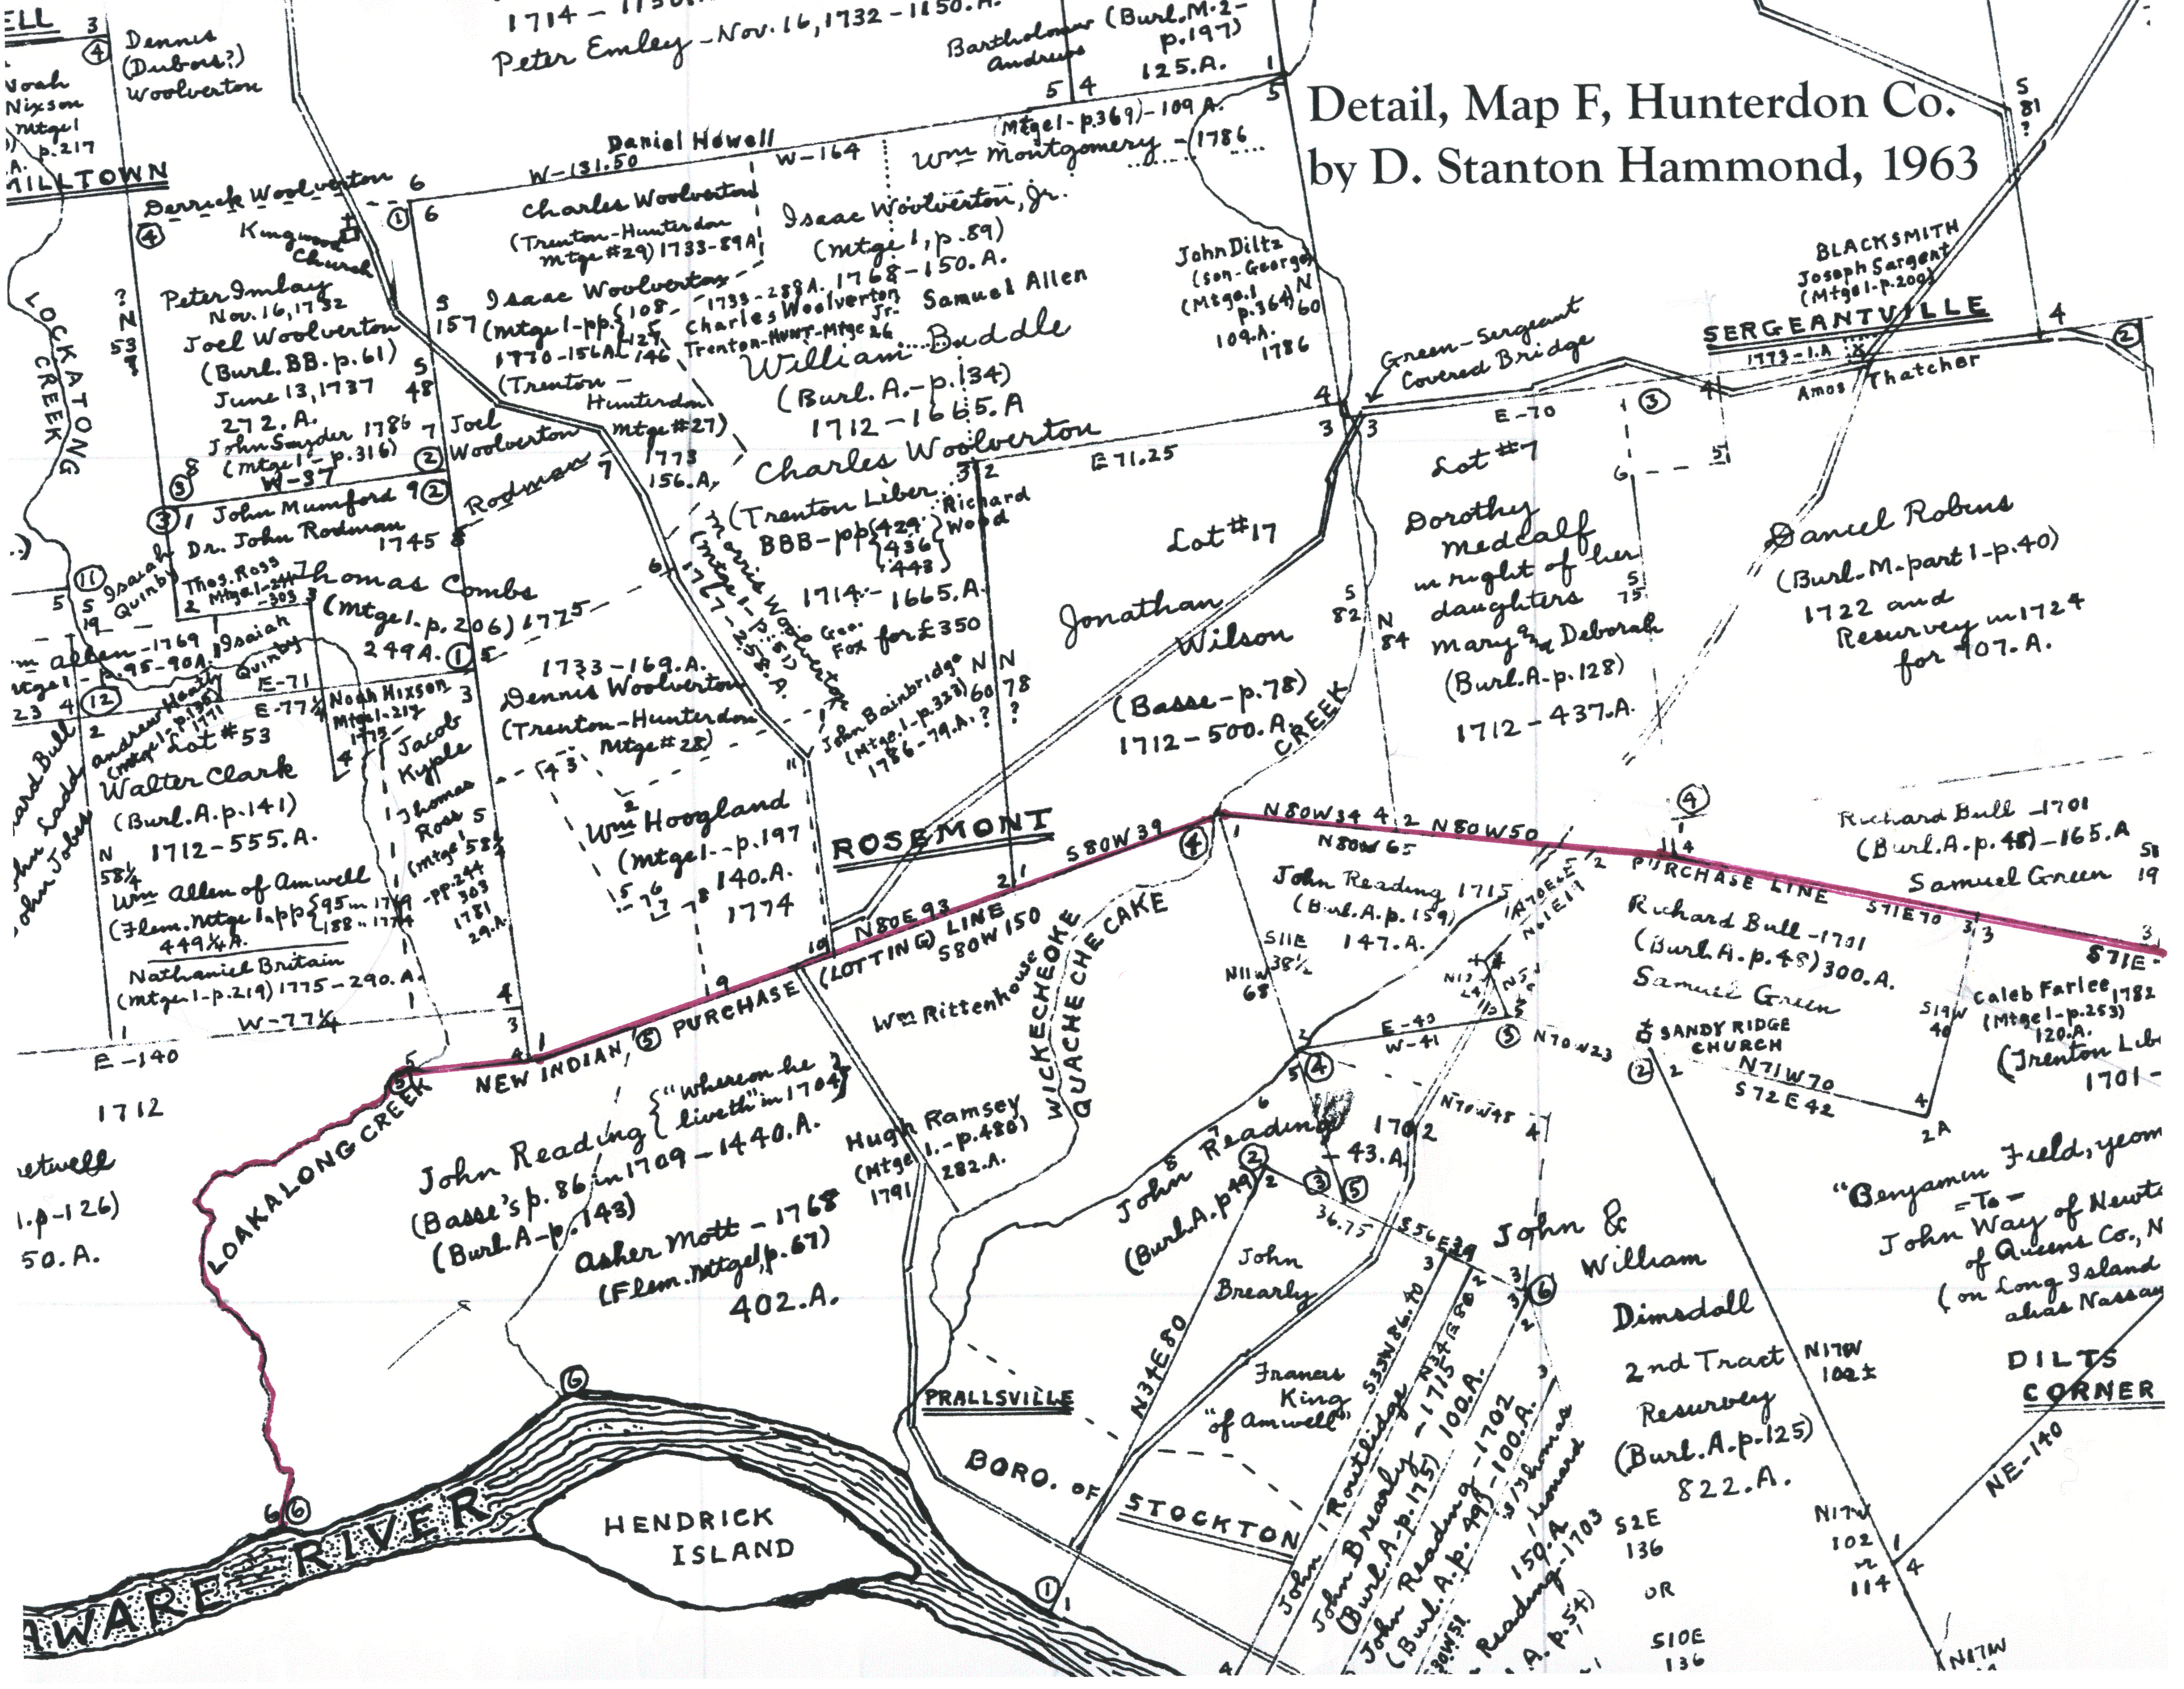 The Lotting Purchase Line, detail of Hammond Map F